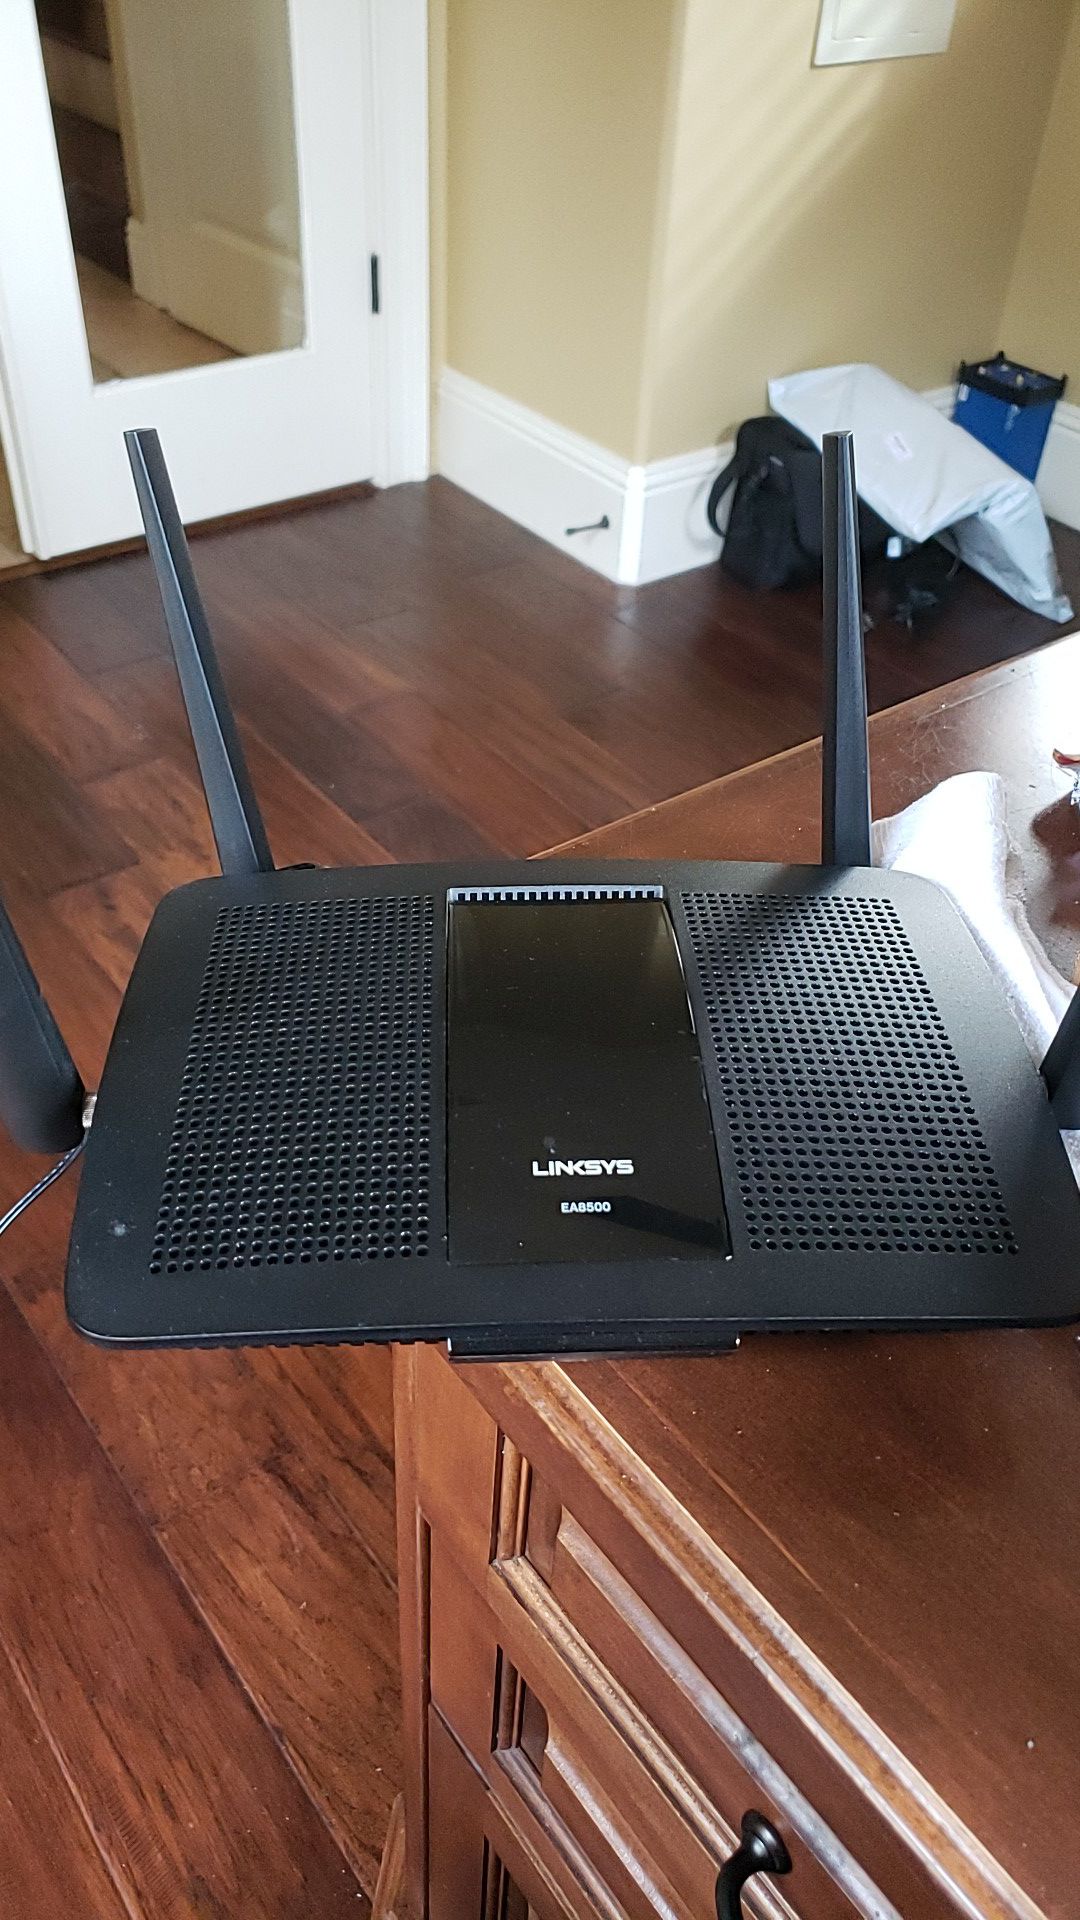 Linksys EA 8500 wifi router